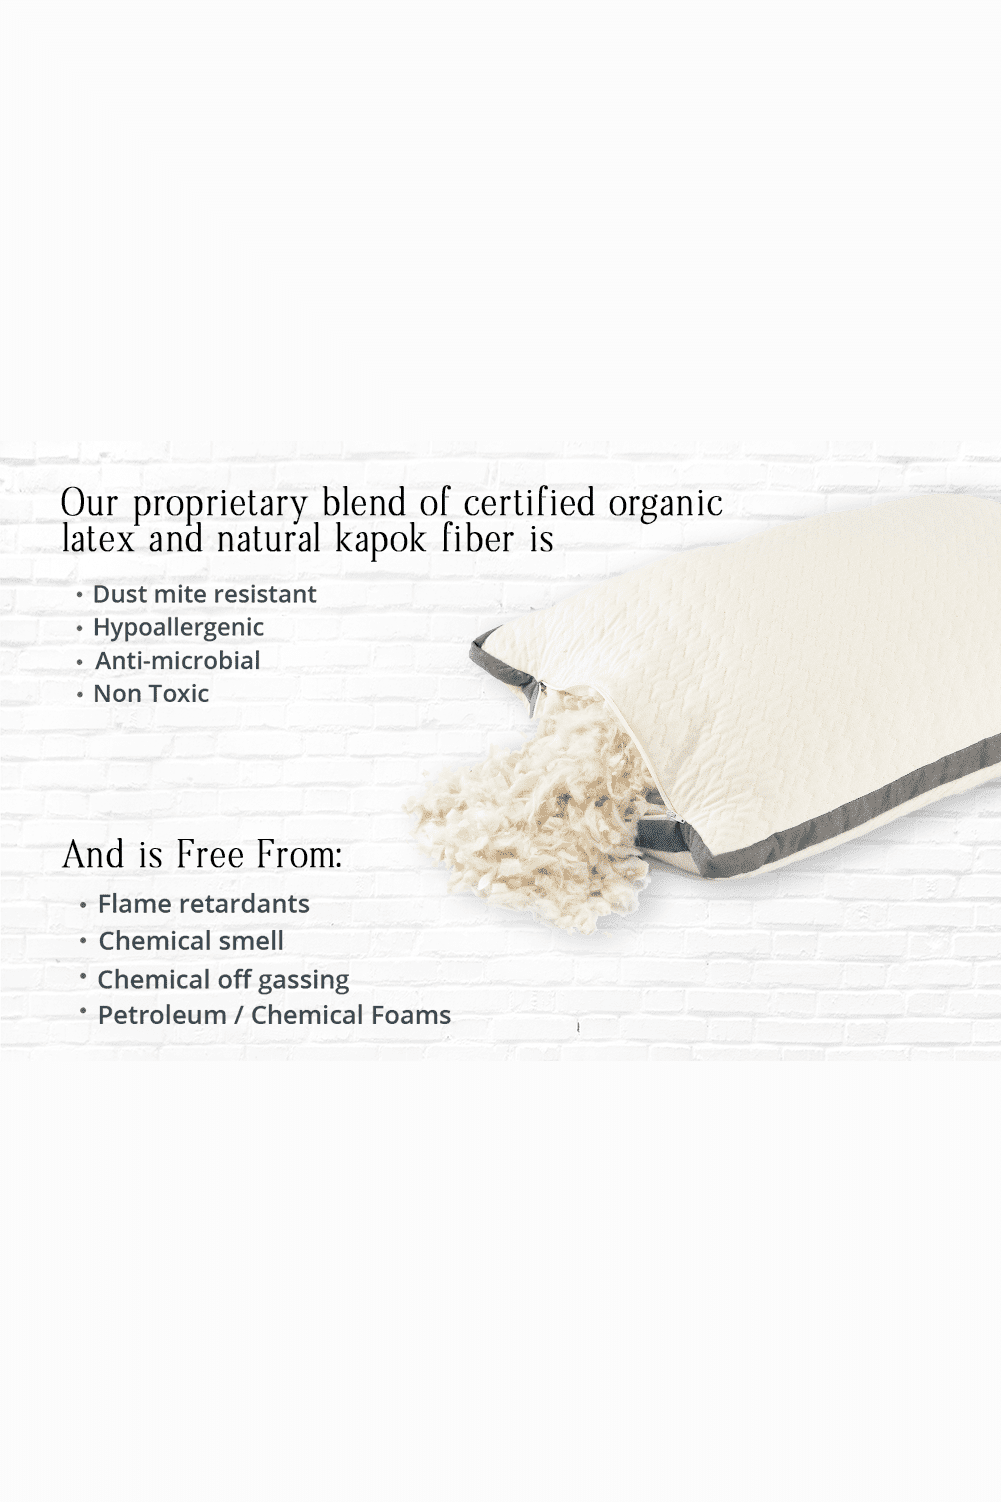 Organic Eco-Friendly Kapok & Natural latex Bed Pillows - Bed Pillow-Stomach, Back and Side Sleeping Pillow for All Sleepers